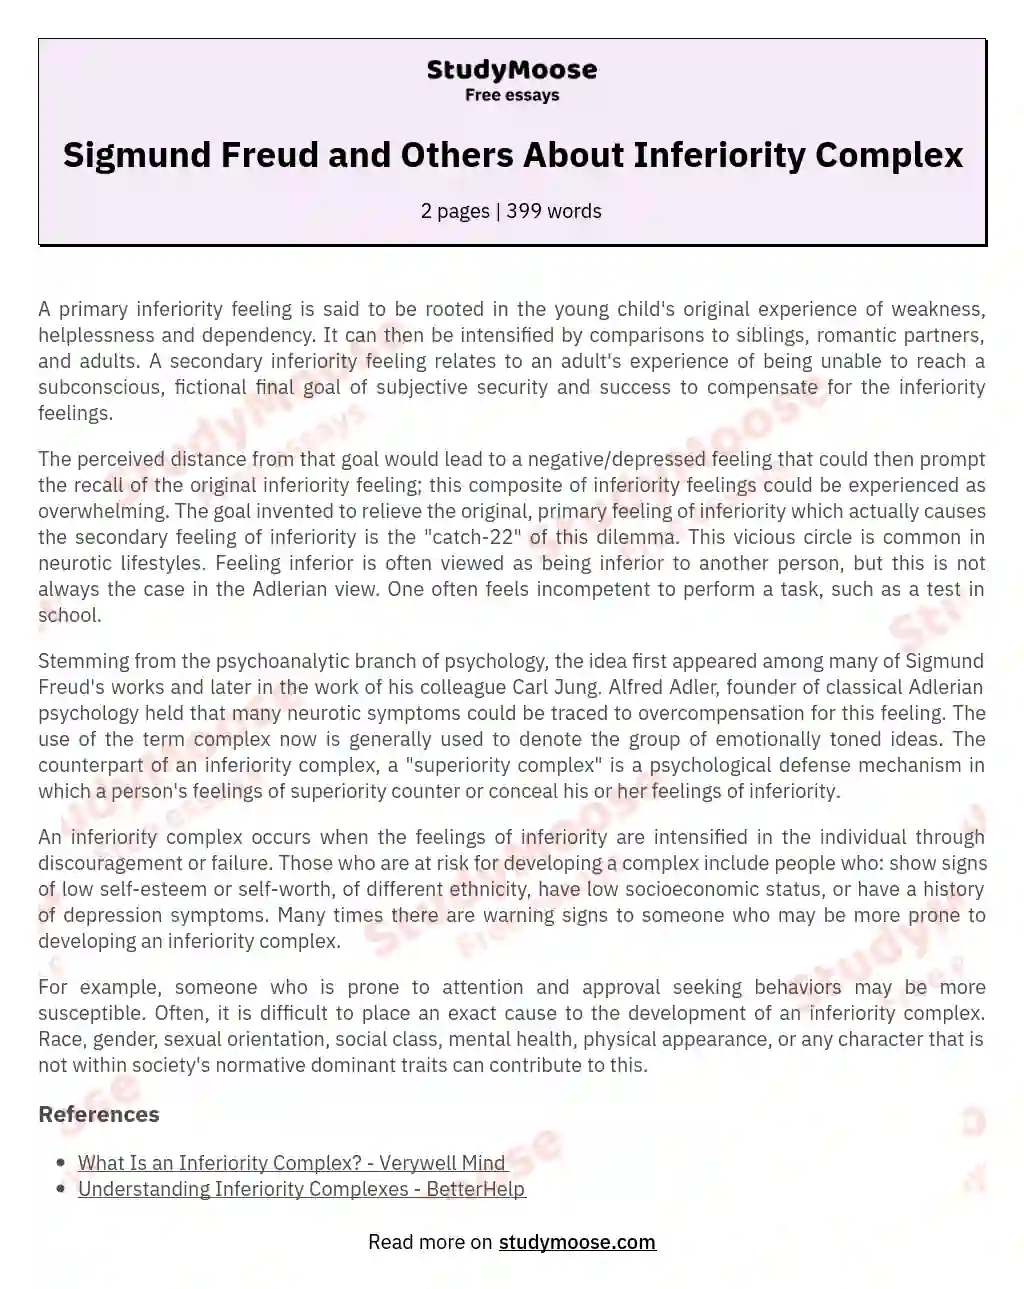 Sigmund Freud and Others About Inferiority Complex essay